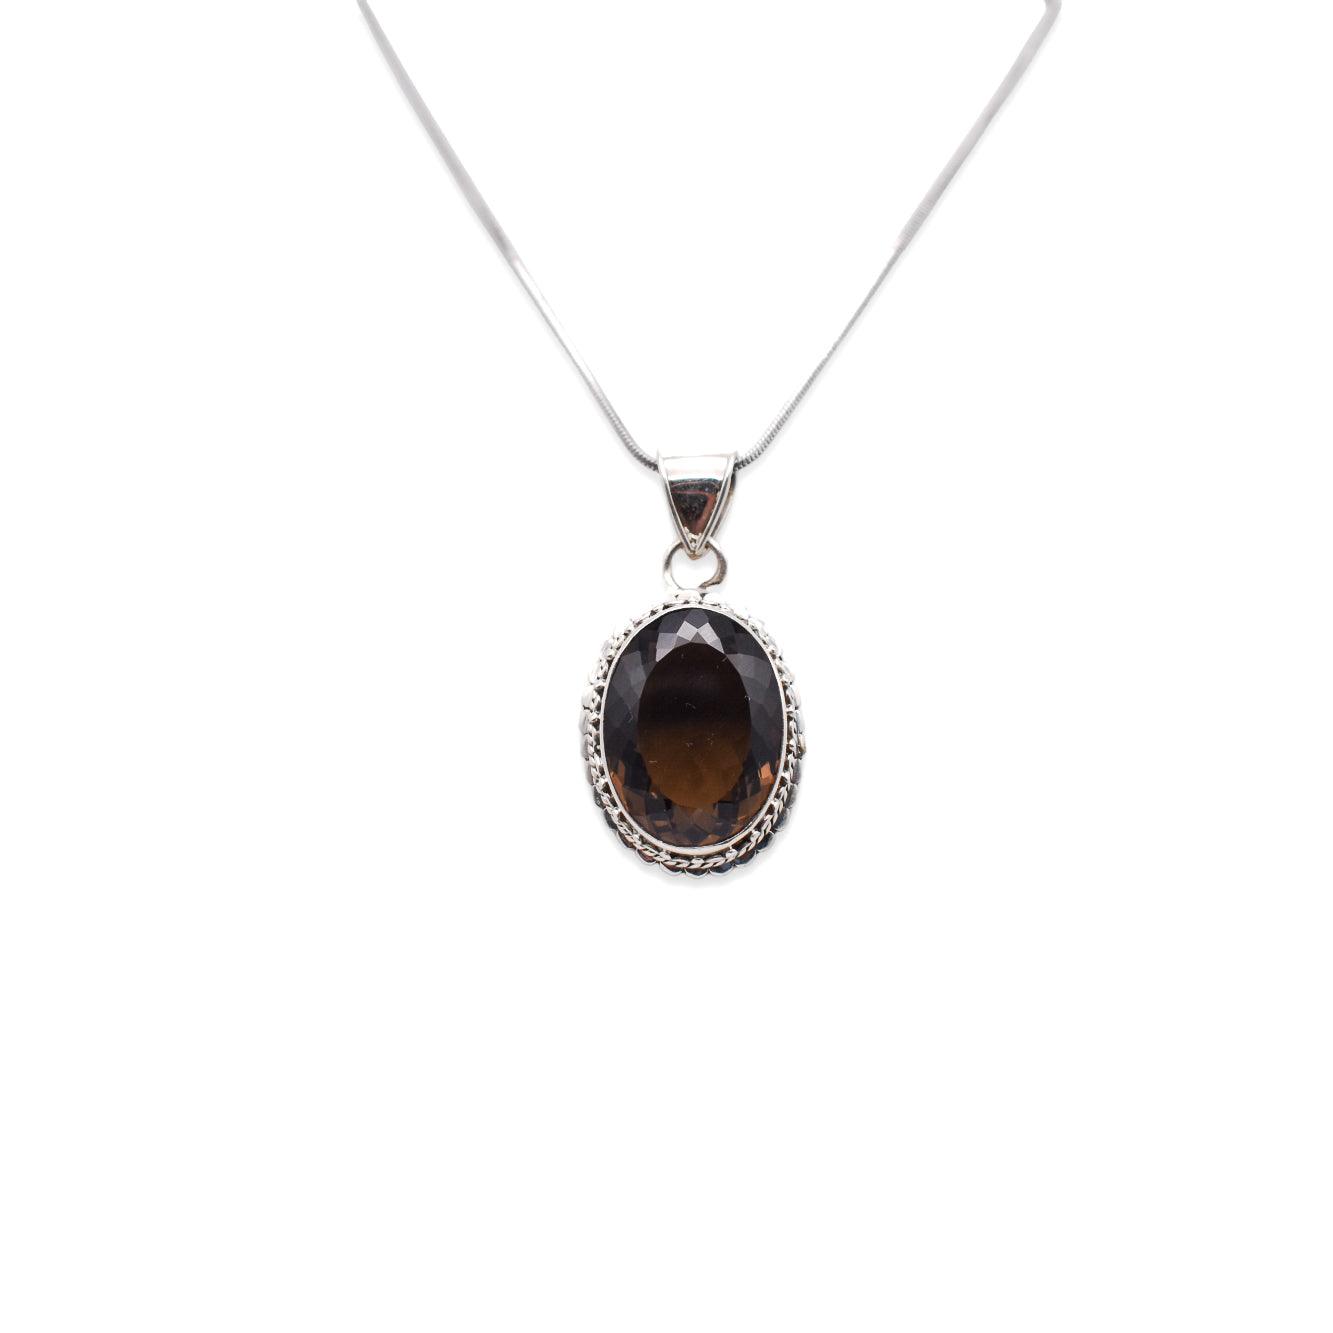 Hanging 925 sterling Silver natural oval shaped smokey quartz Pendant with chain